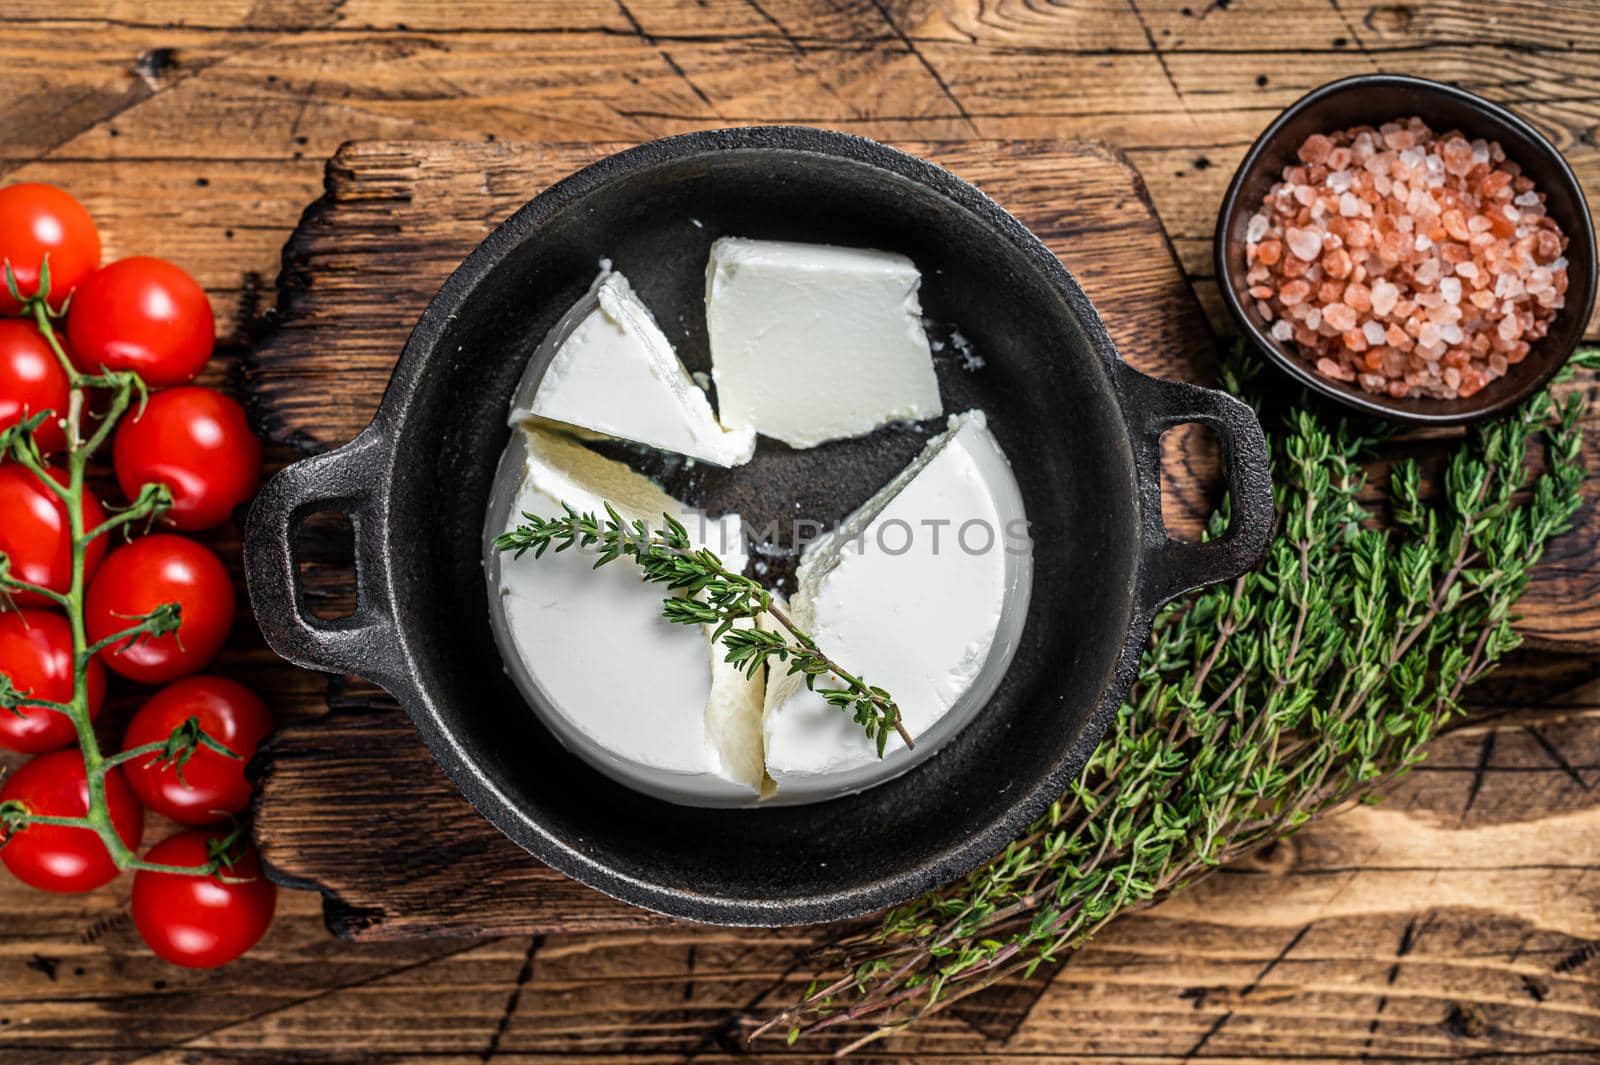 Fresh Ricotta cream Cheese in a pan with basil and tomato. wooden background. Top view.